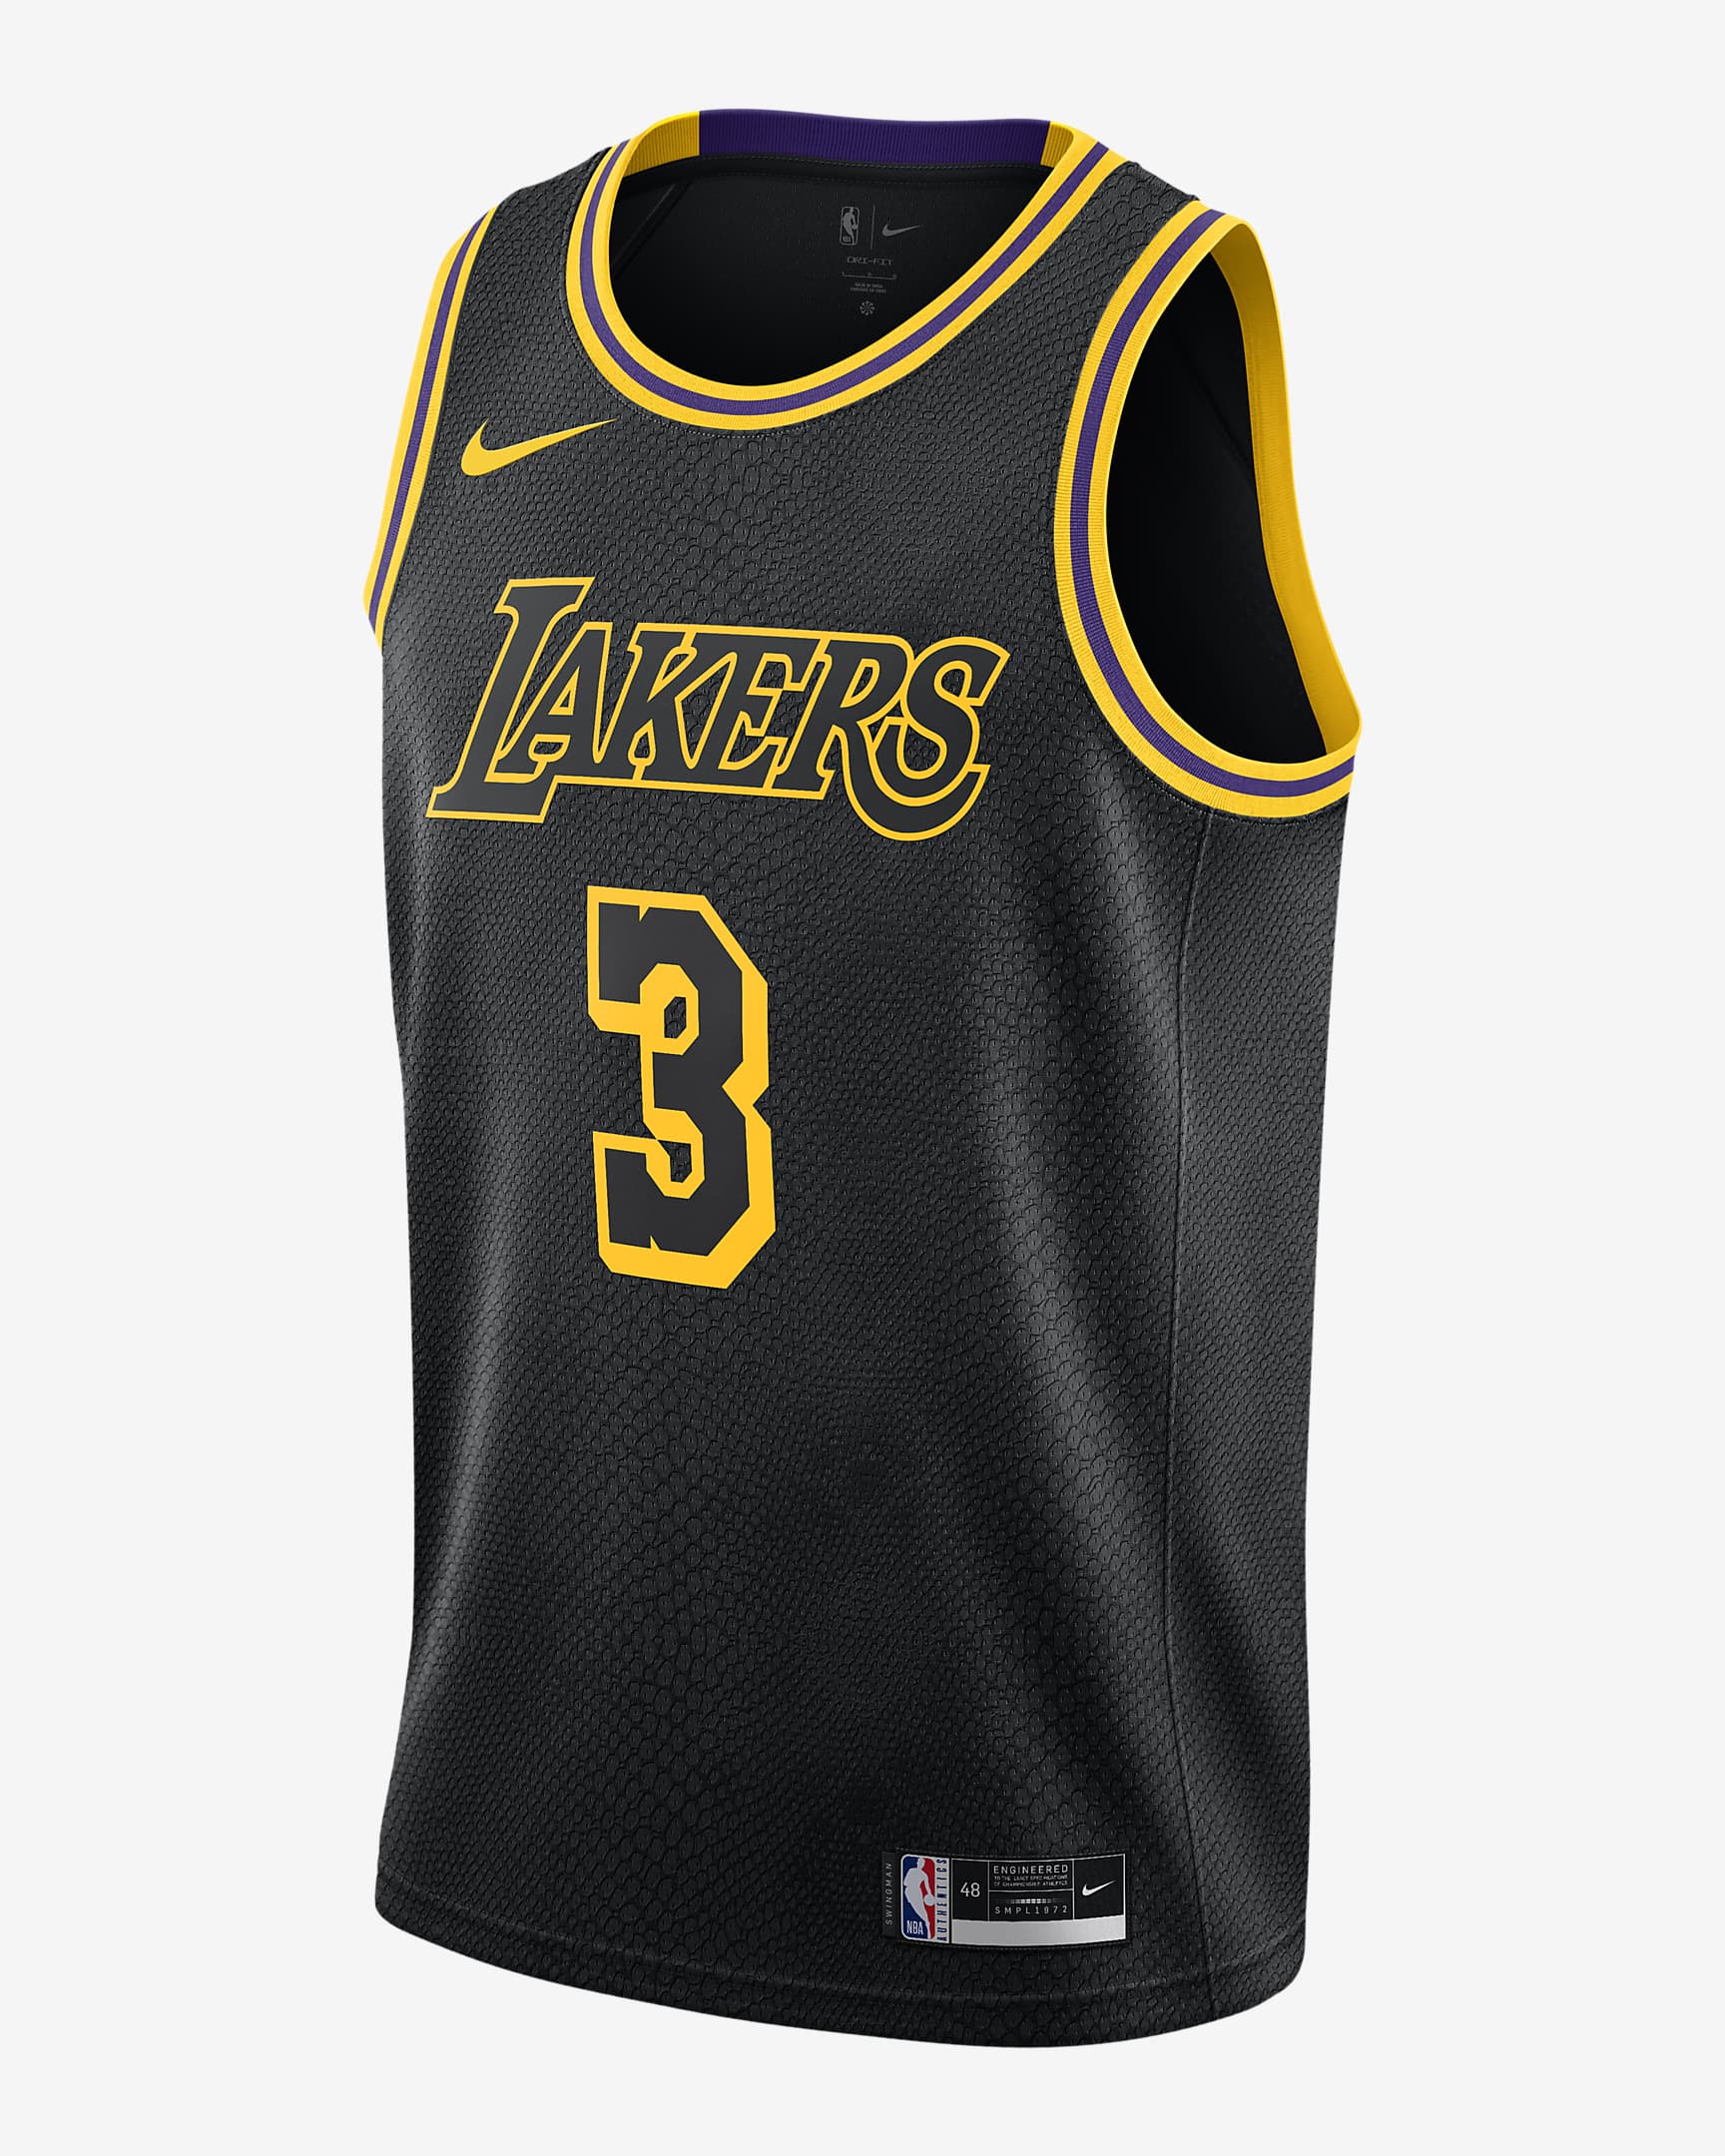 anthony lakers jersey